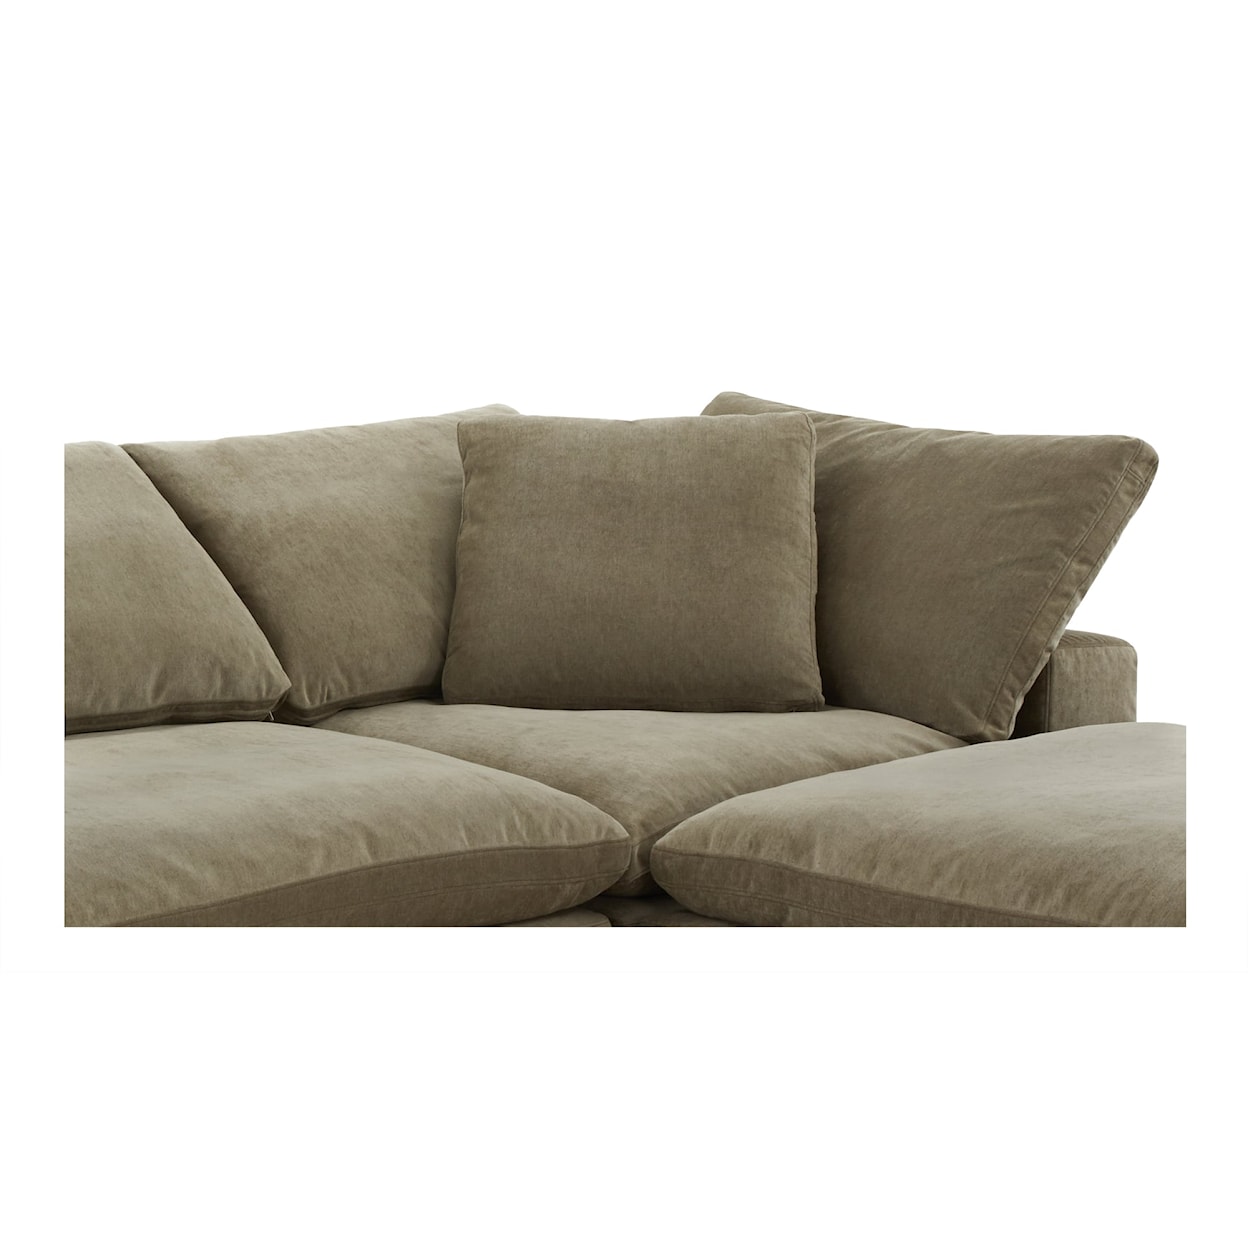 Moe's Home Collection Clay Nook Sectional Sofa